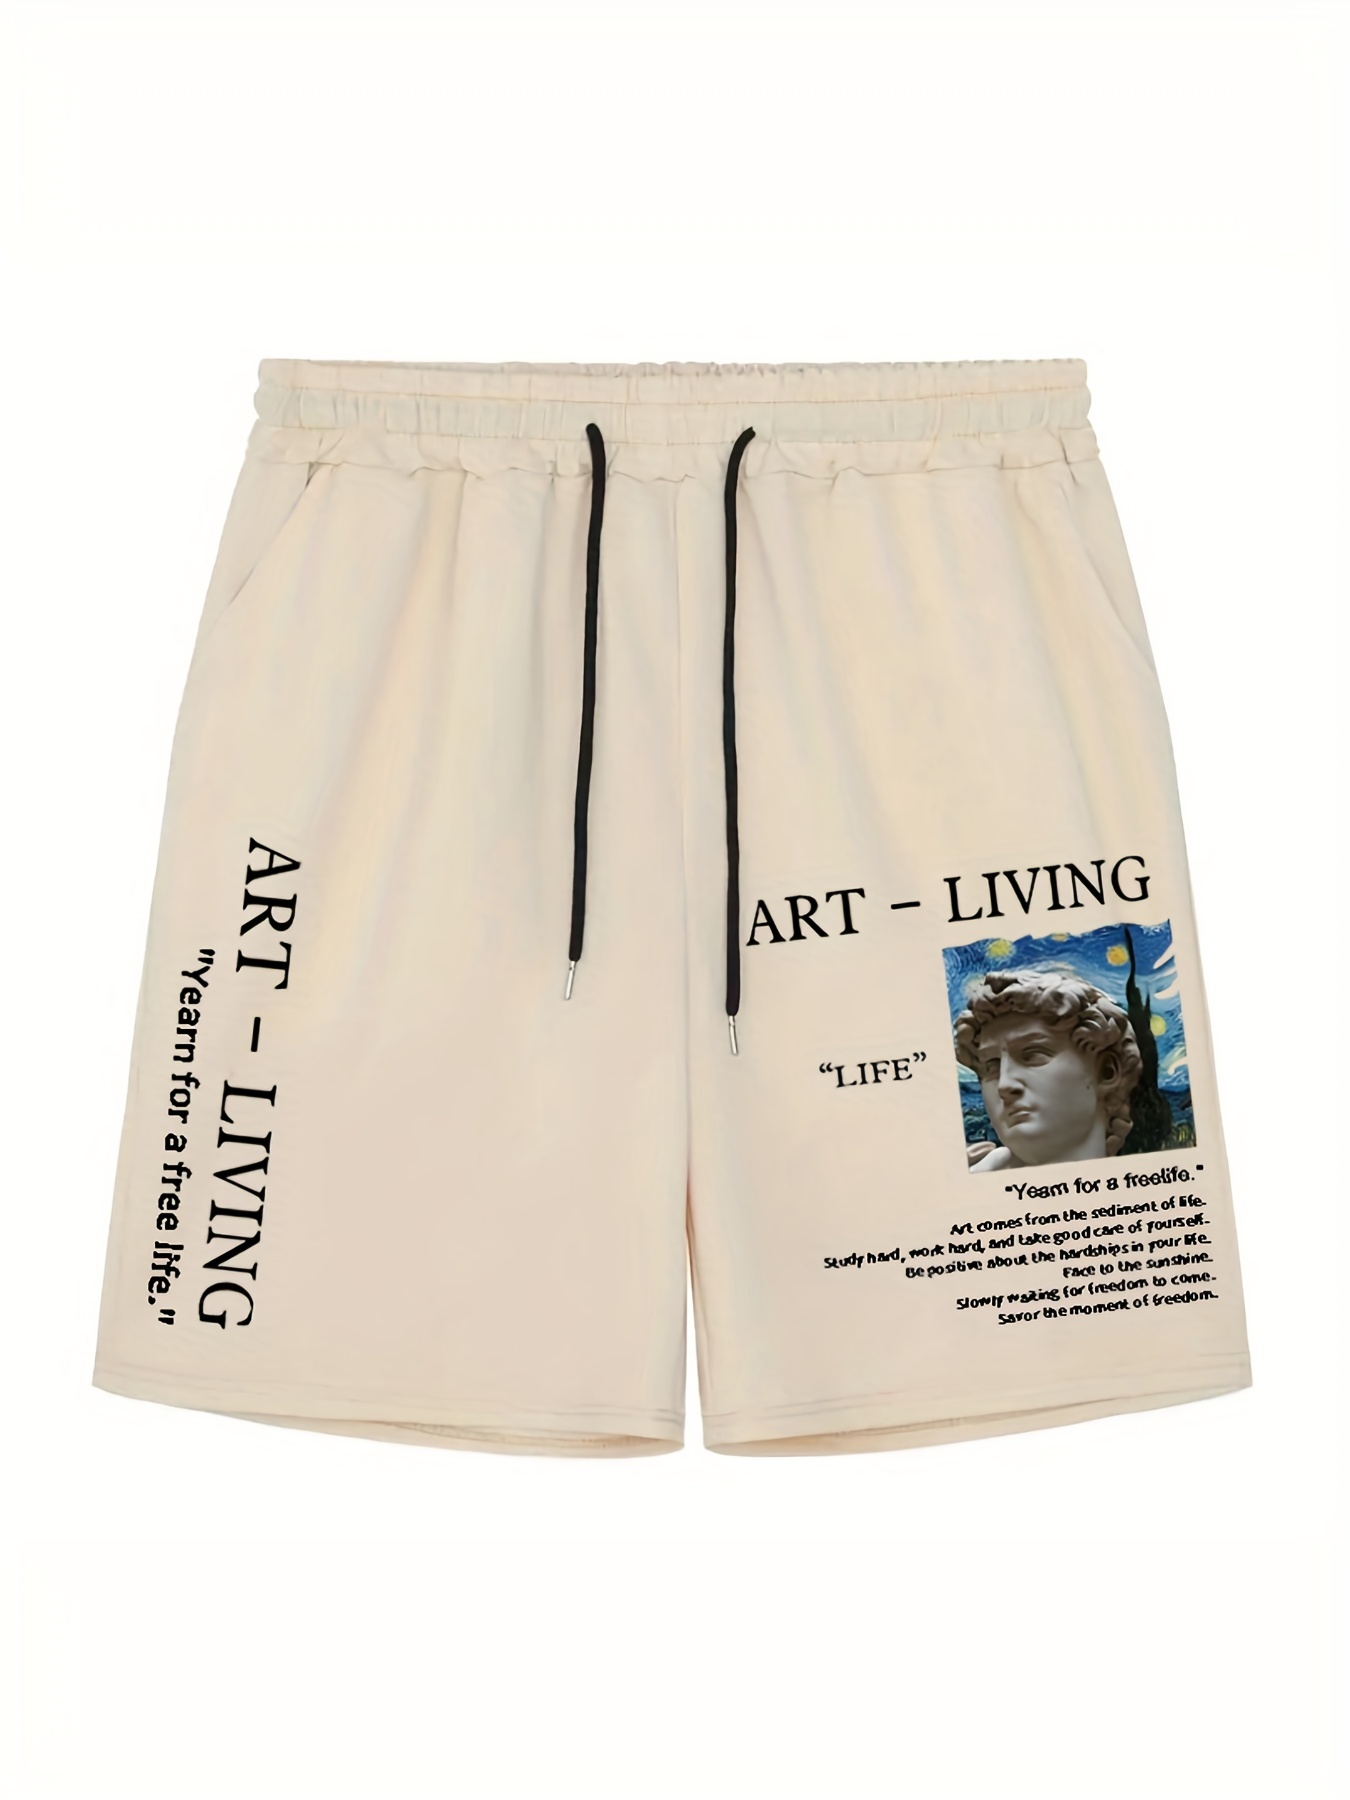 Trunks Collection for Art of Living